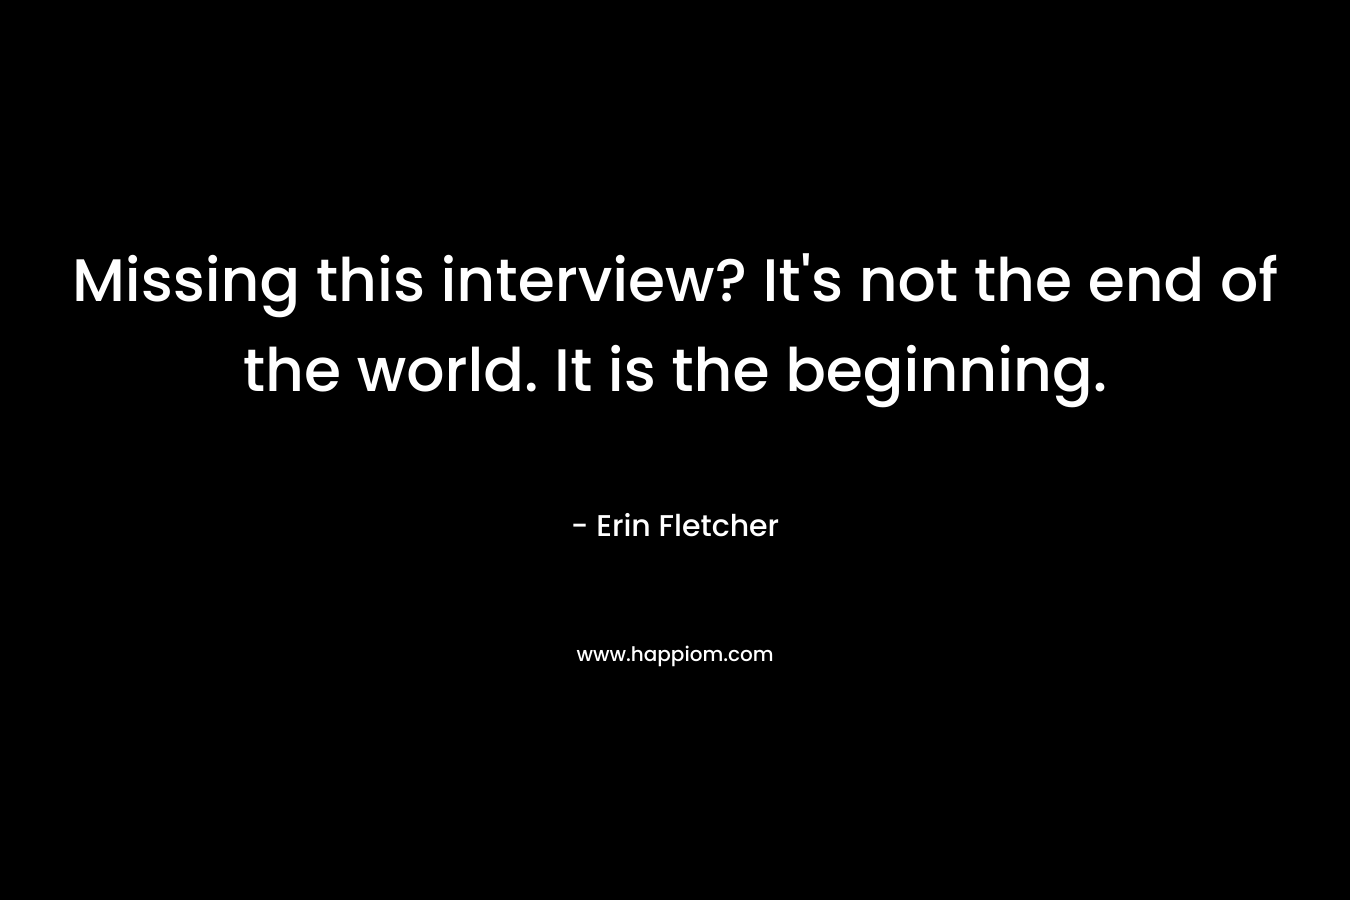 Missing this interview? It’s not the end of the world. It is the beginning. – Erin Fletcher